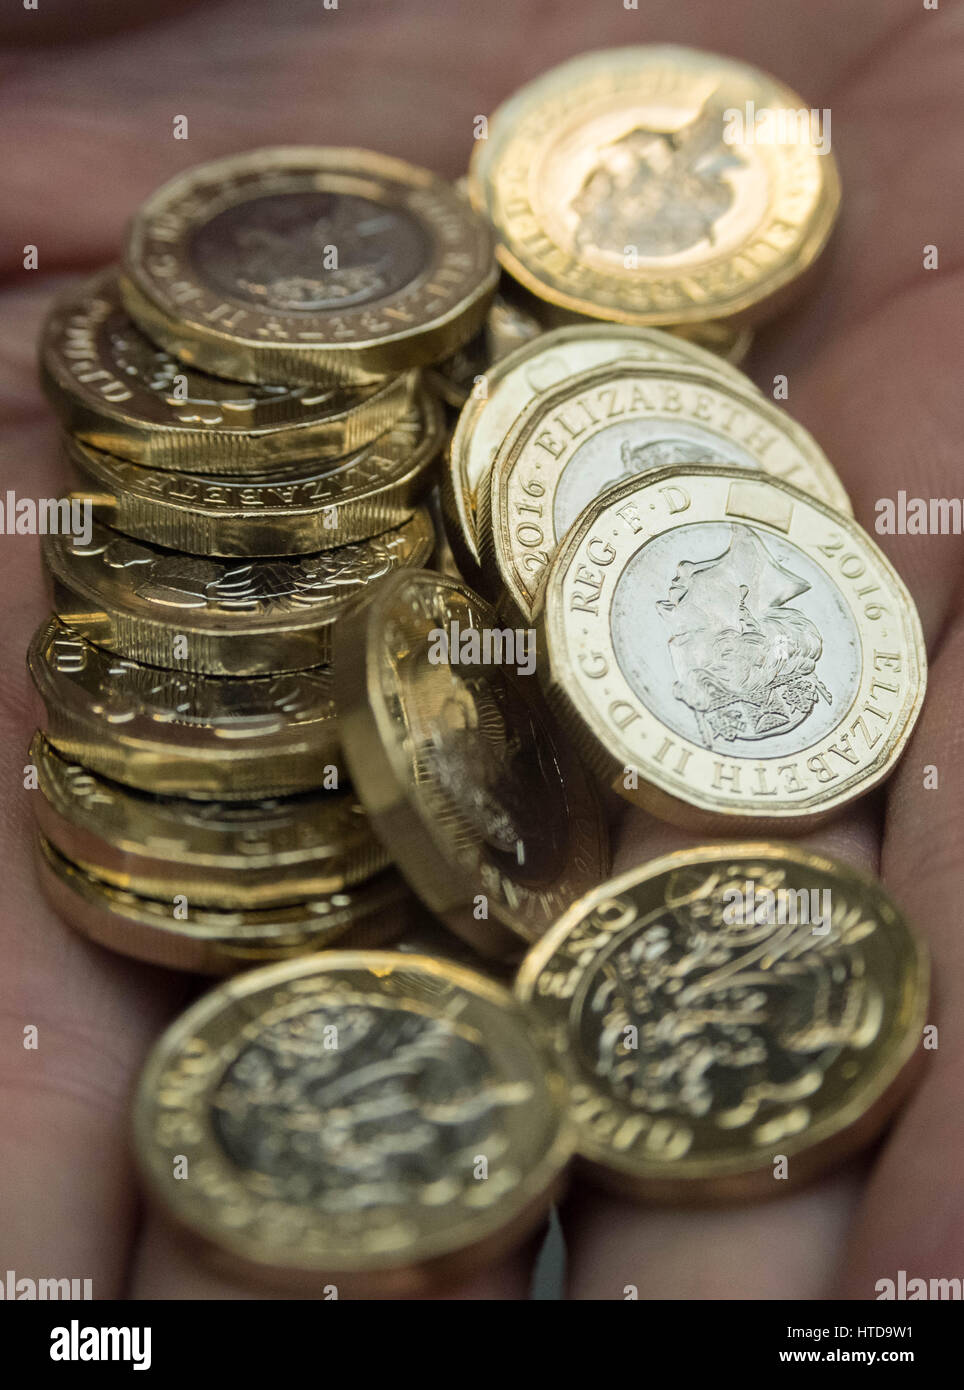 New £1 coins tested in the London Assay office ahead of their release 28th March, 2017. Pictured: New £1 coins that are in the Assay Office being tested. The Coins of the Realm are tested by diameter, weight and composition. Stock Photo